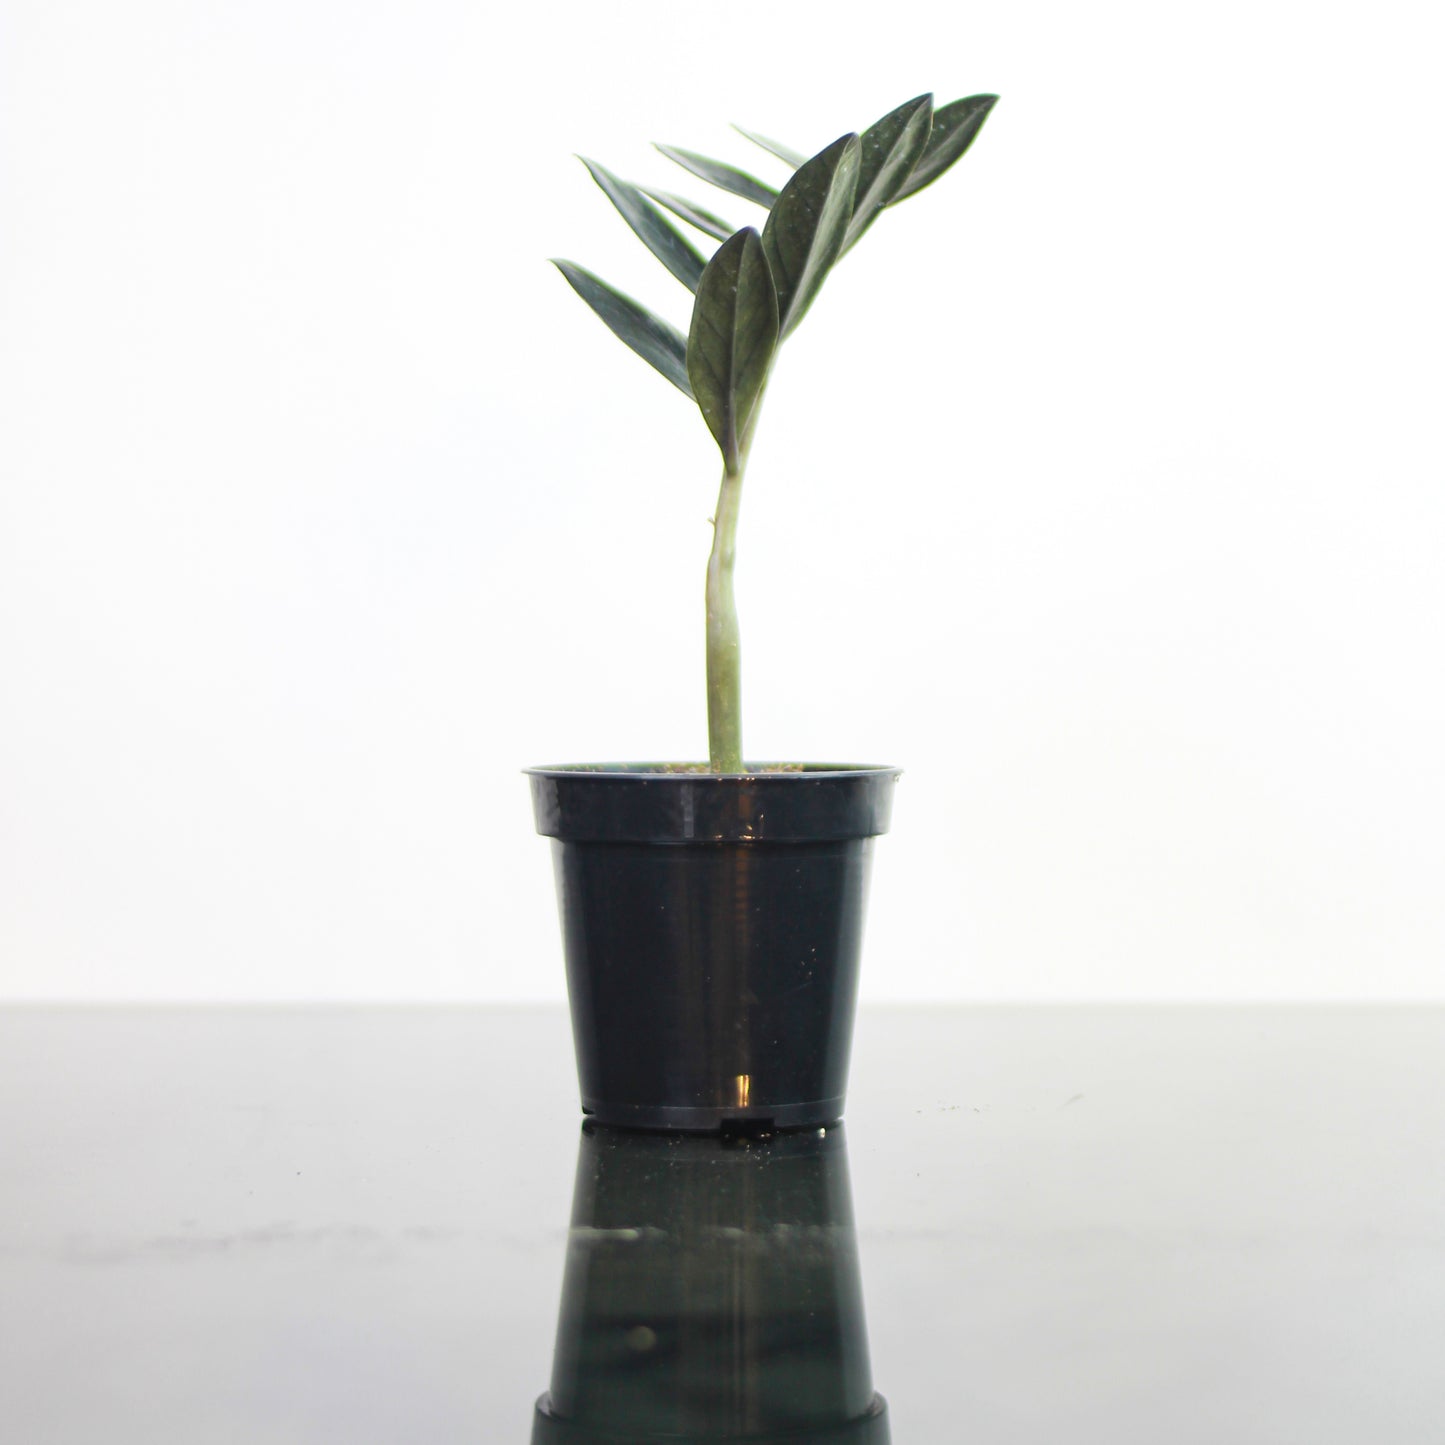 Black raven ZZ Plant (Zamioculcas zamiifolia) in a 4 inch pot. Indoor plant for sale by Promise Supply for delivery and pickup in Toronto